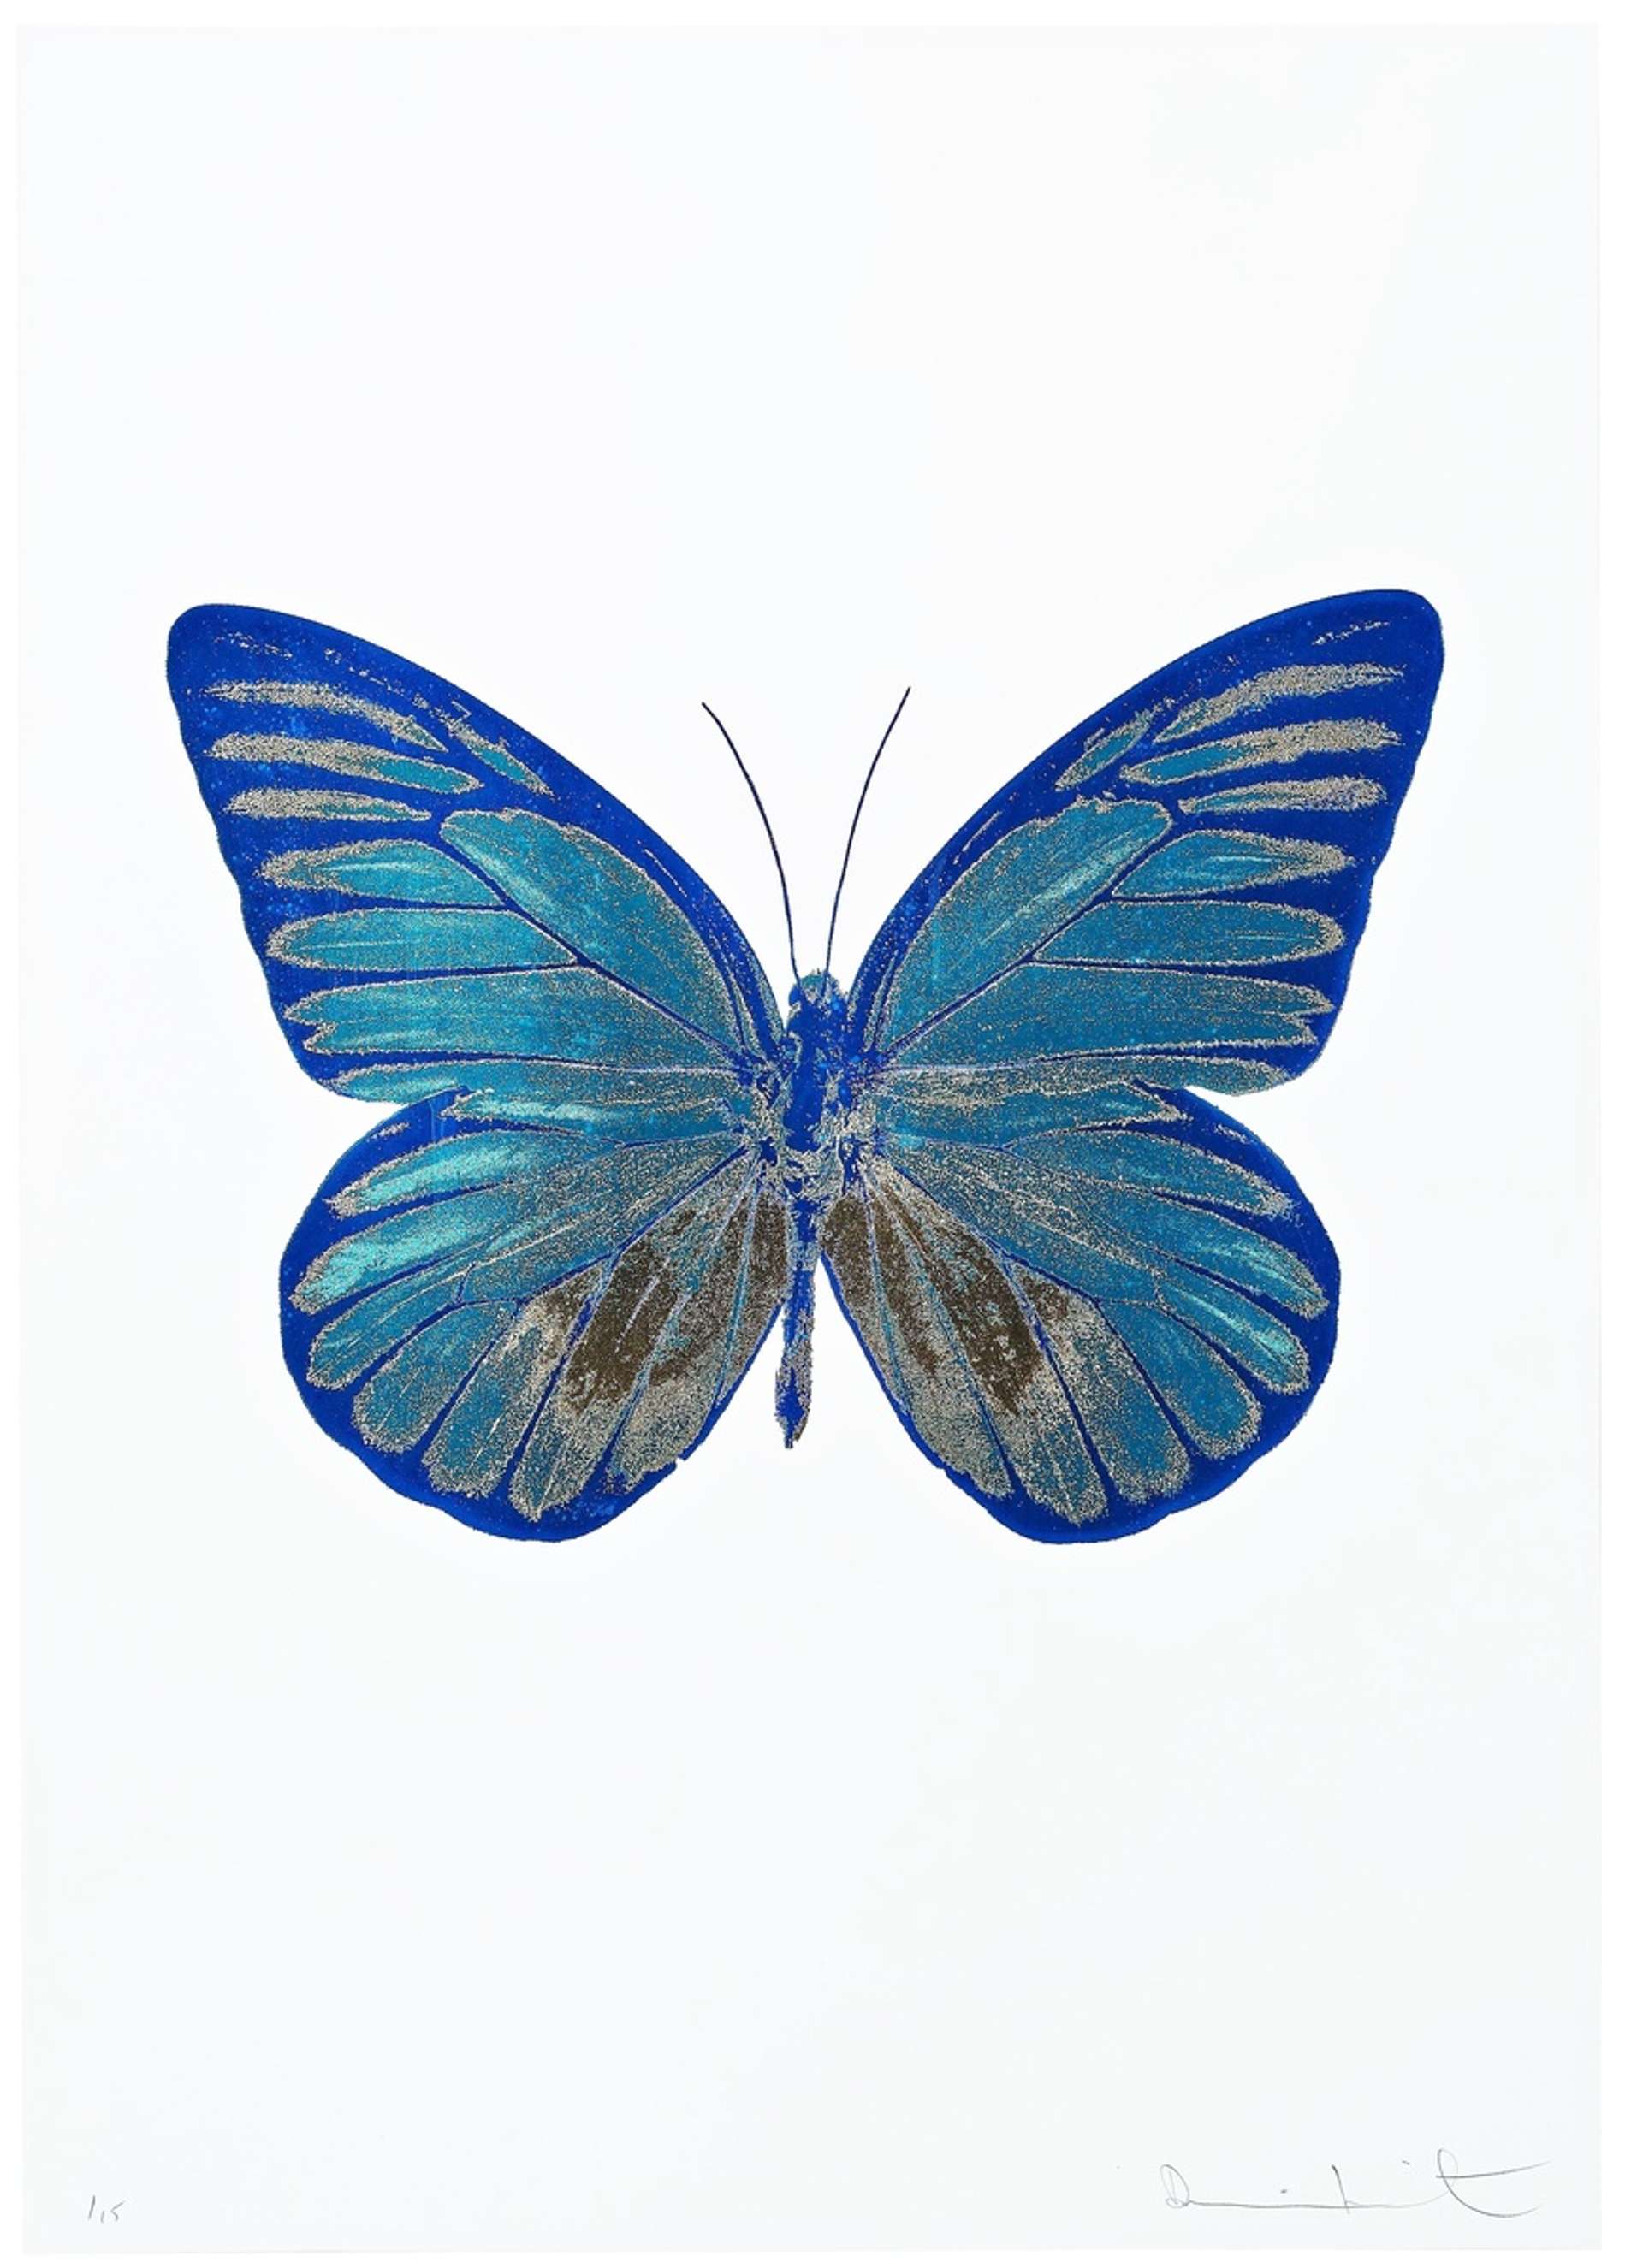 The Souls IV (topaz/westminster blue/african gold) by Damien Hirst